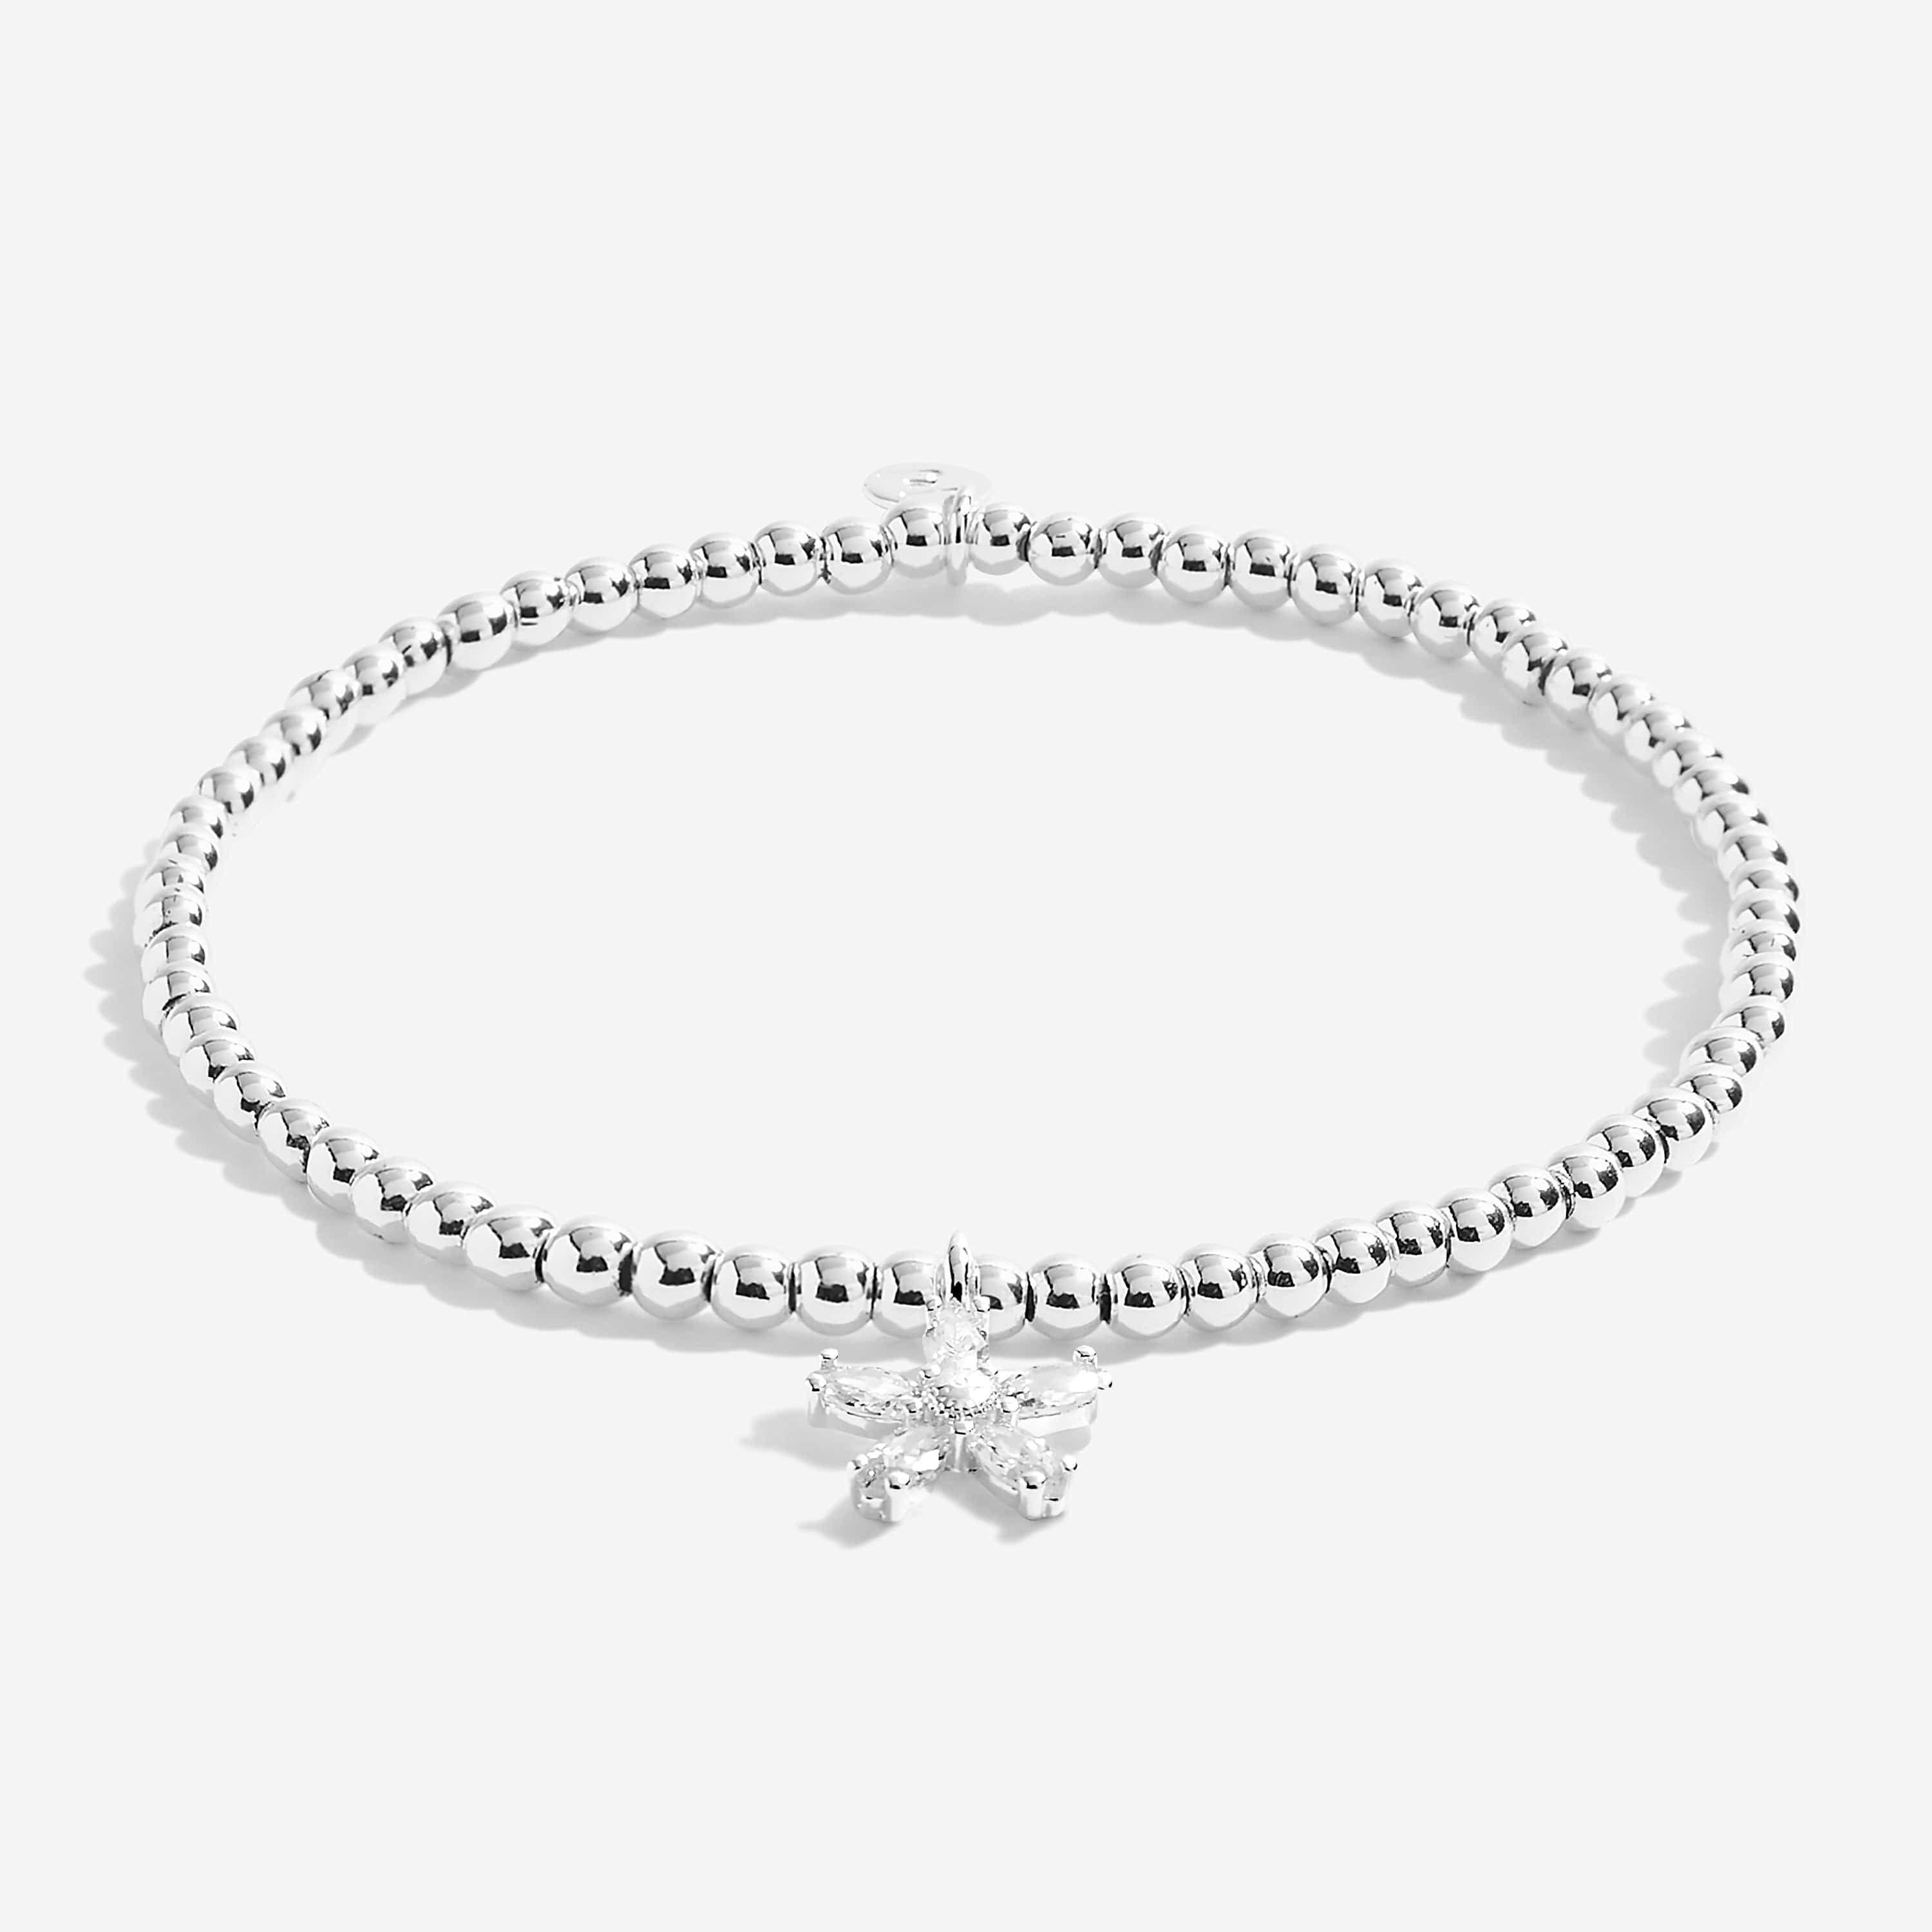 Joma Jewellery Bracelet Joma Jewellery Bracelet - If Mums were Flowers I'd Pick You